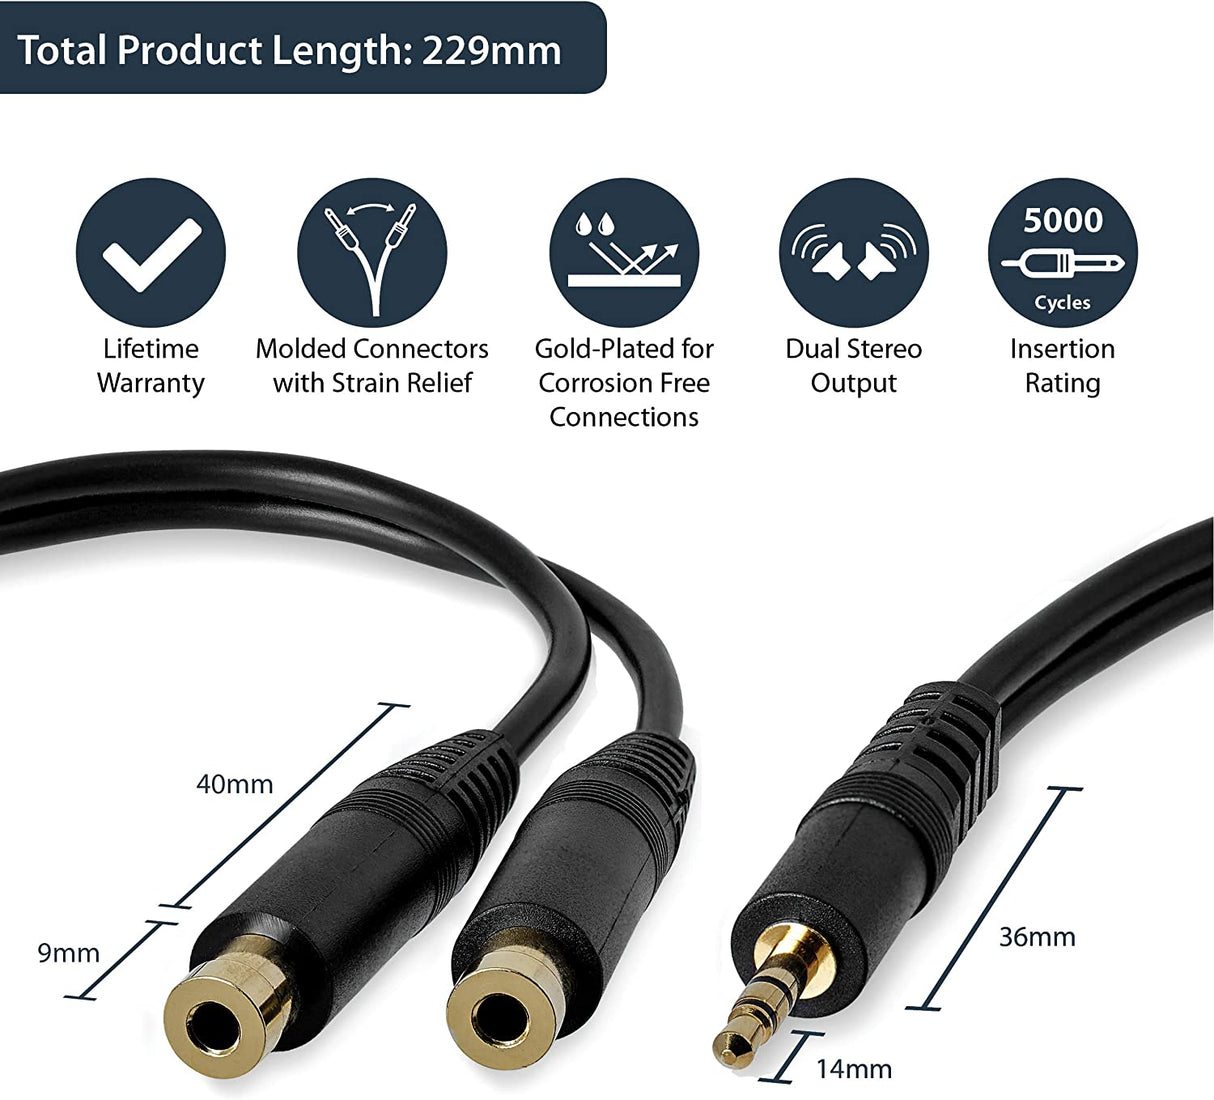 StarTech.com 6 in. 3.5mm Audio Splitter Cable - Stereo Splitter Cable - Gold Terminals - 3.5mm Male to 2x 3.5mm Female - Headphone Splitter (MUY1MFF),Black Standard Cable Black